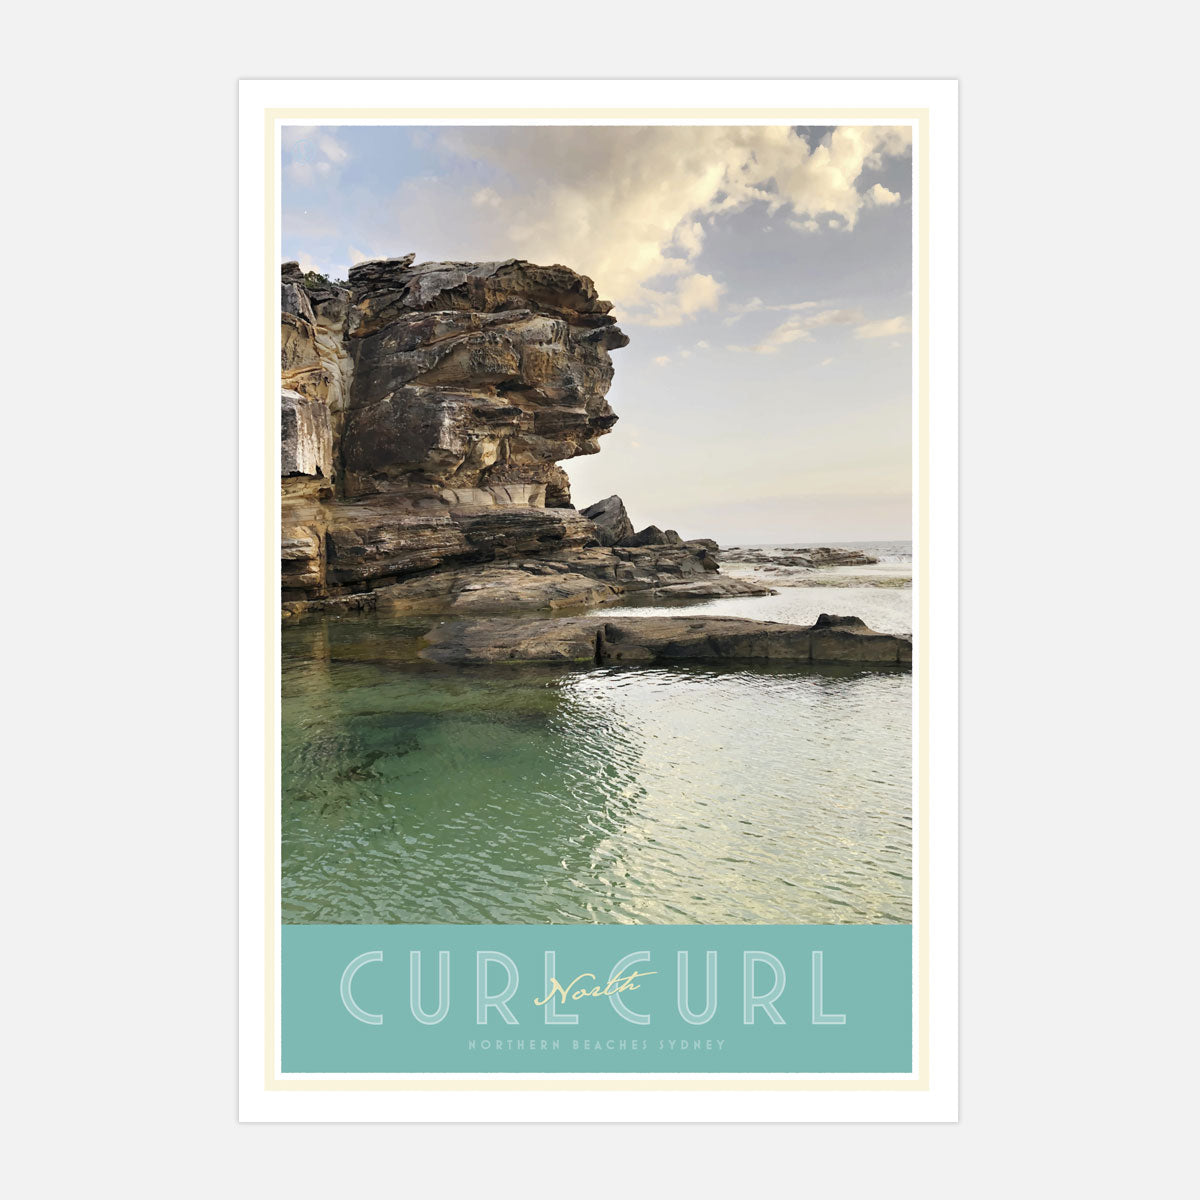 North Curl Curl vintage travel style poster by places we luv